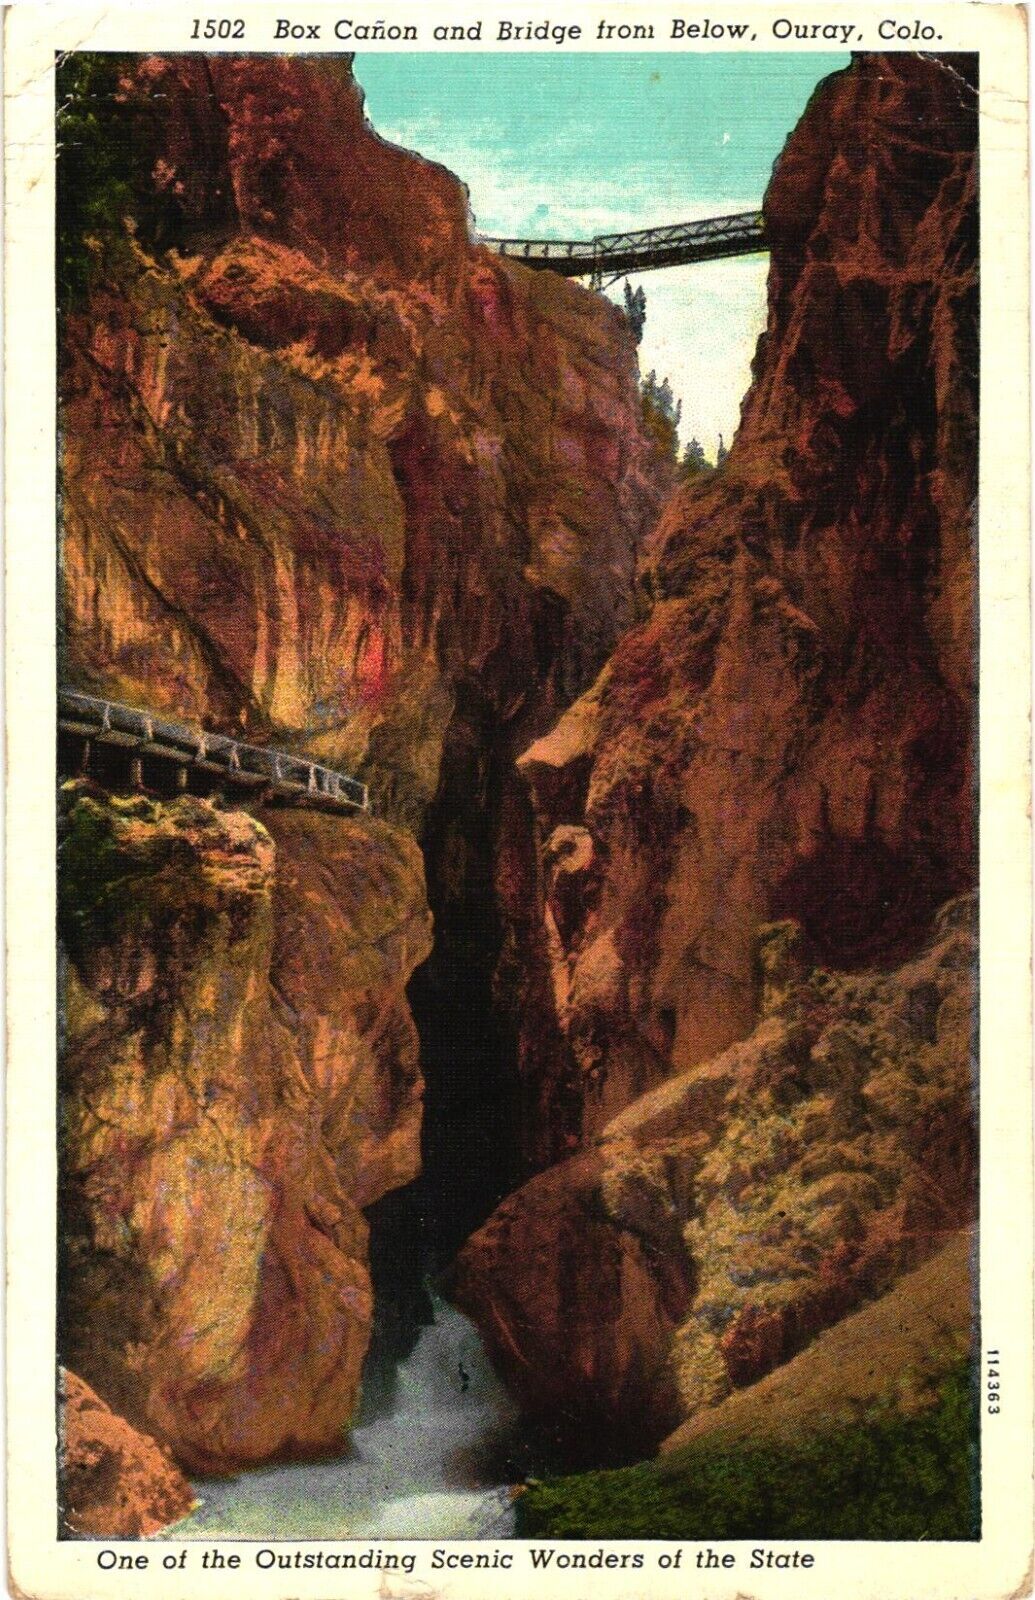 Picturesque Box Cañon and Bridge from Below, Ouray, Colorado Postcard